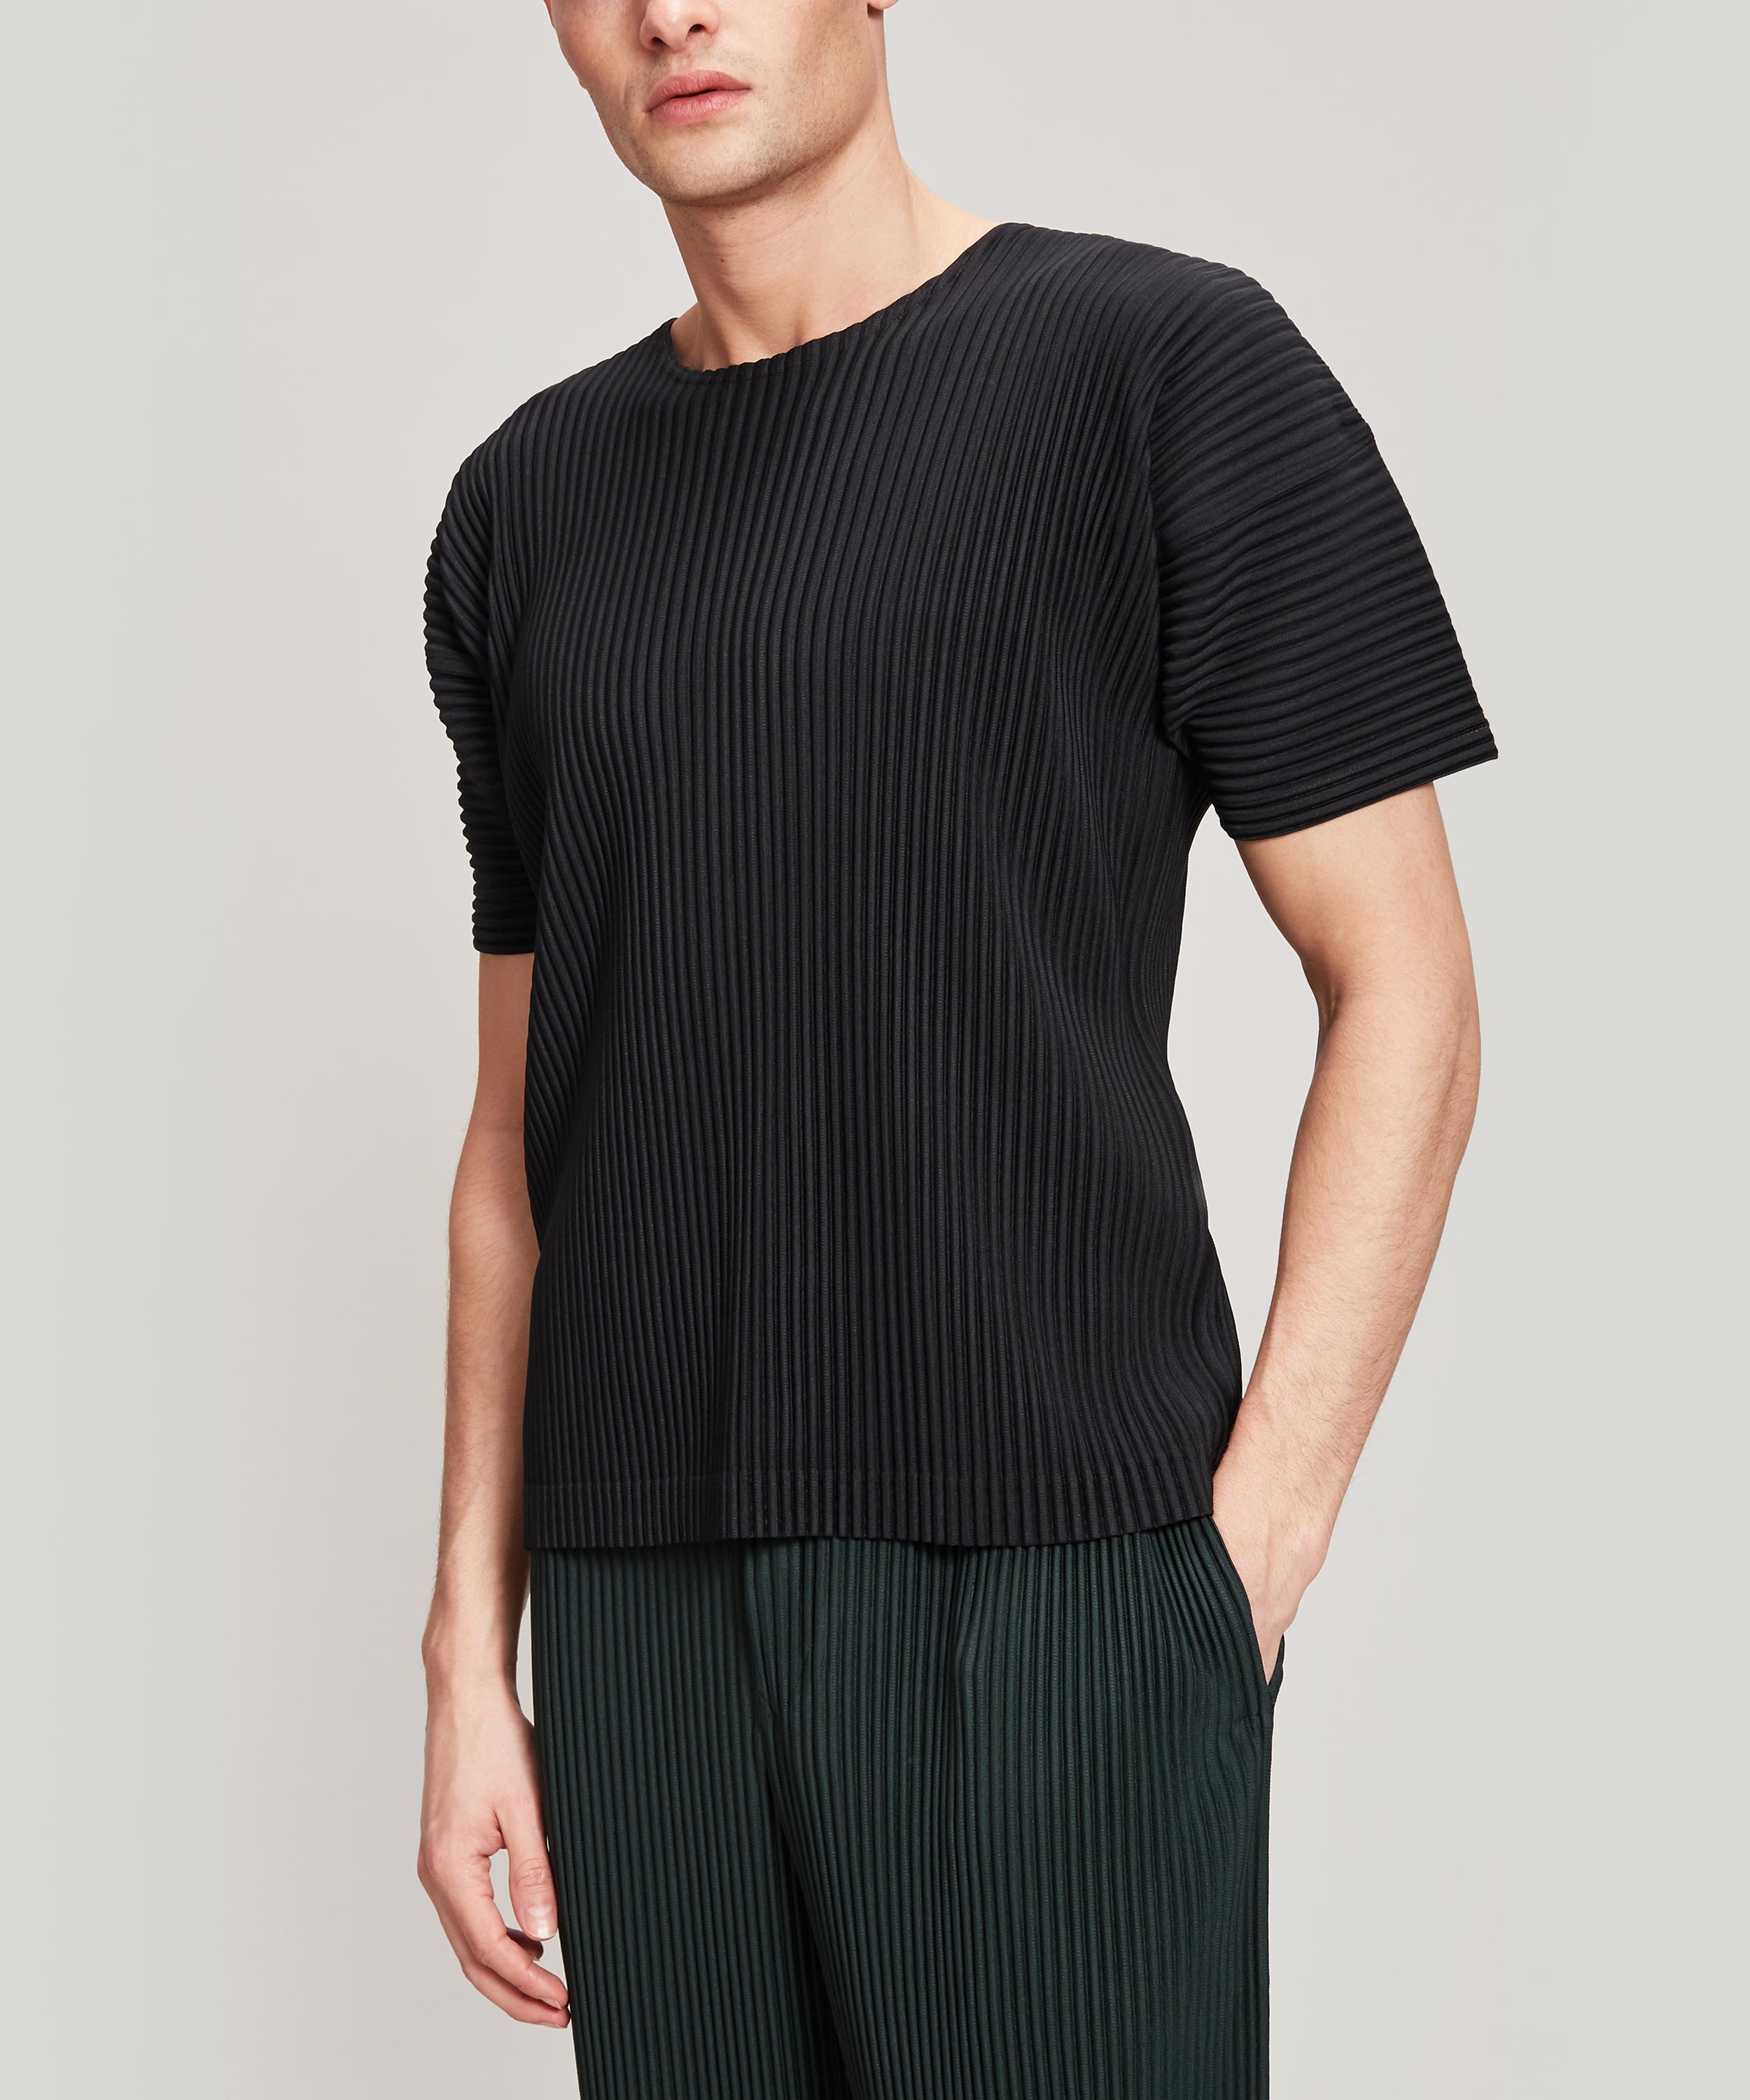 Homme Plissé Issey Miyake Core Short-sleeve T-shirt in Black for Men - Lyst